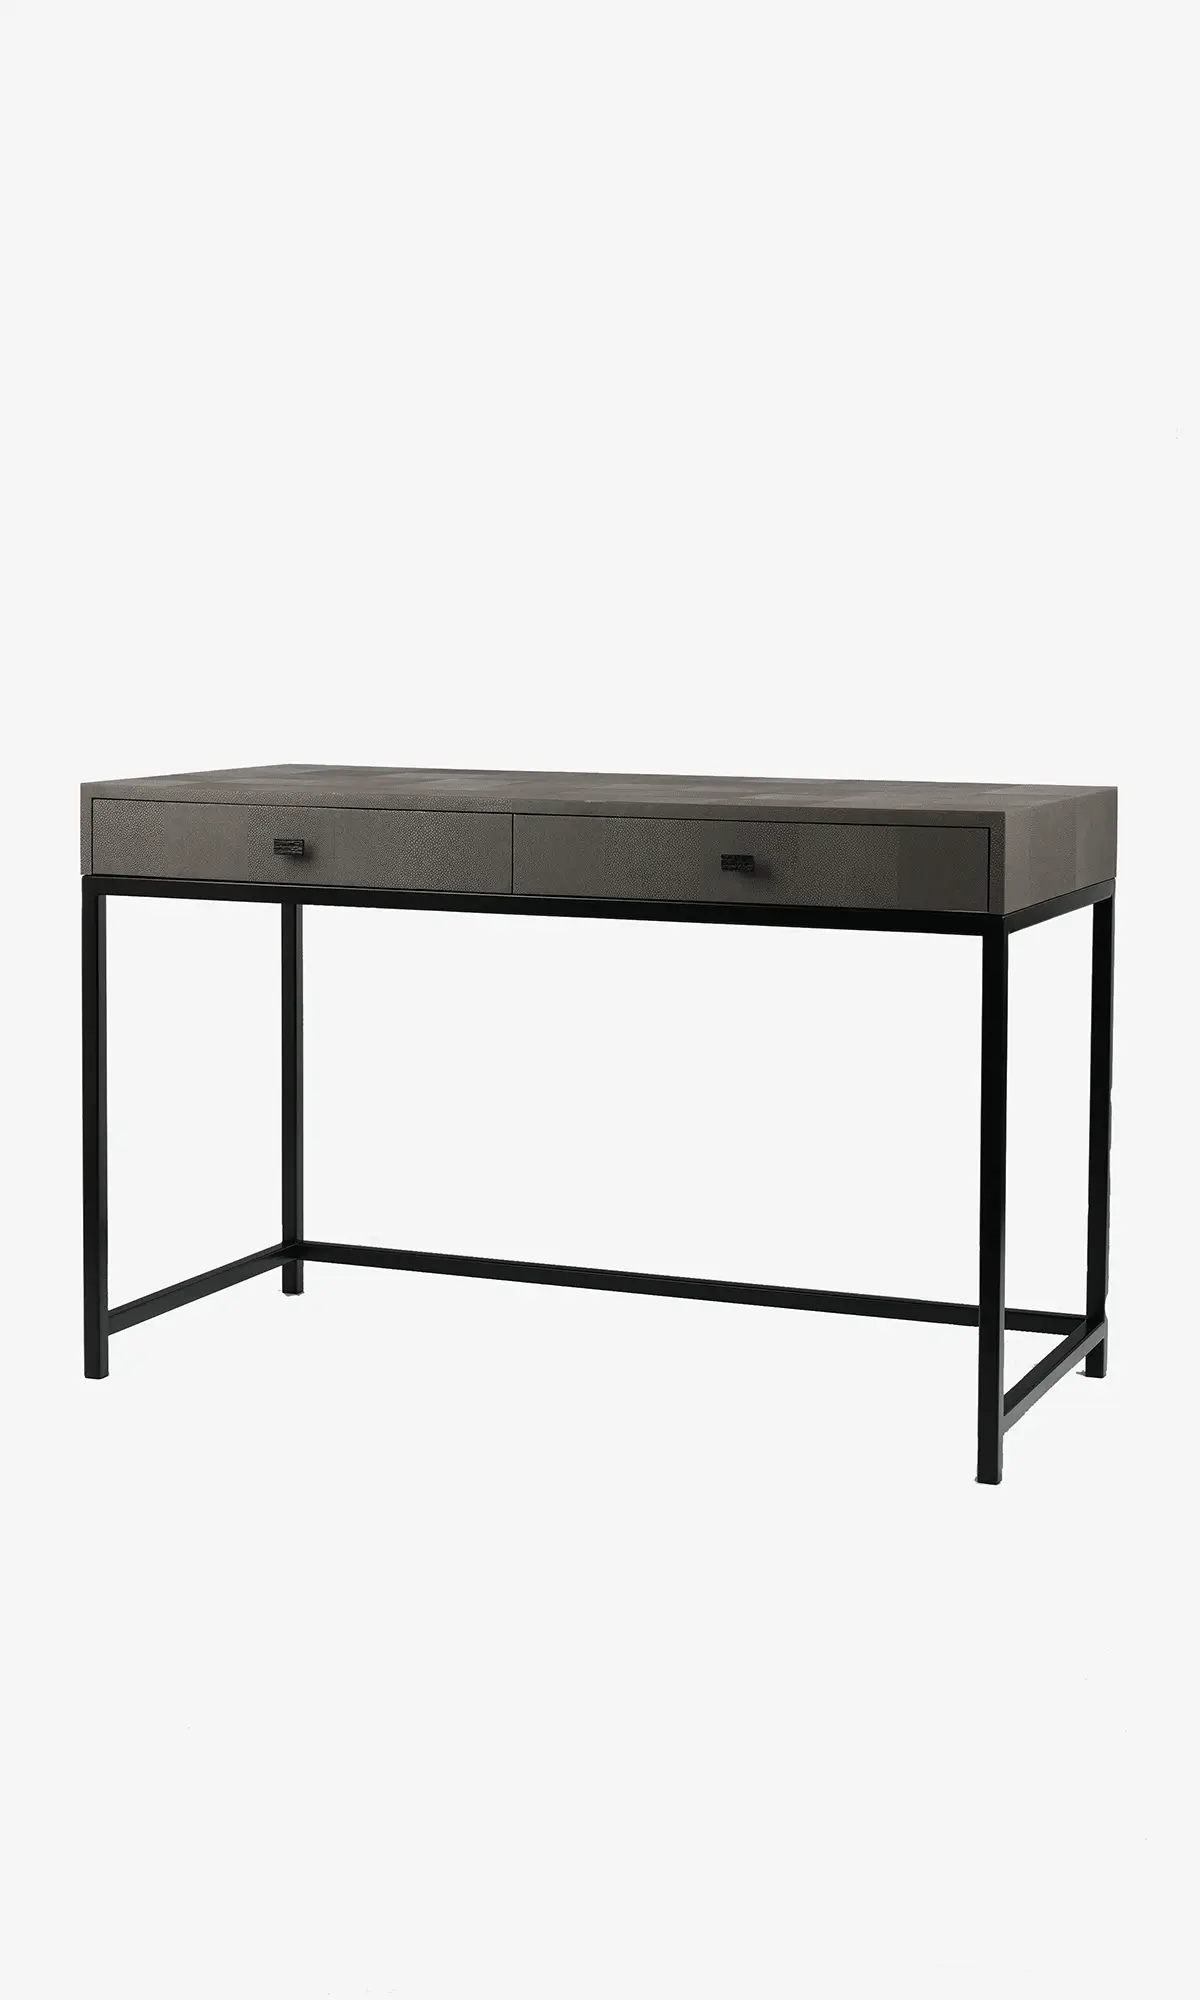 luxury desk product category